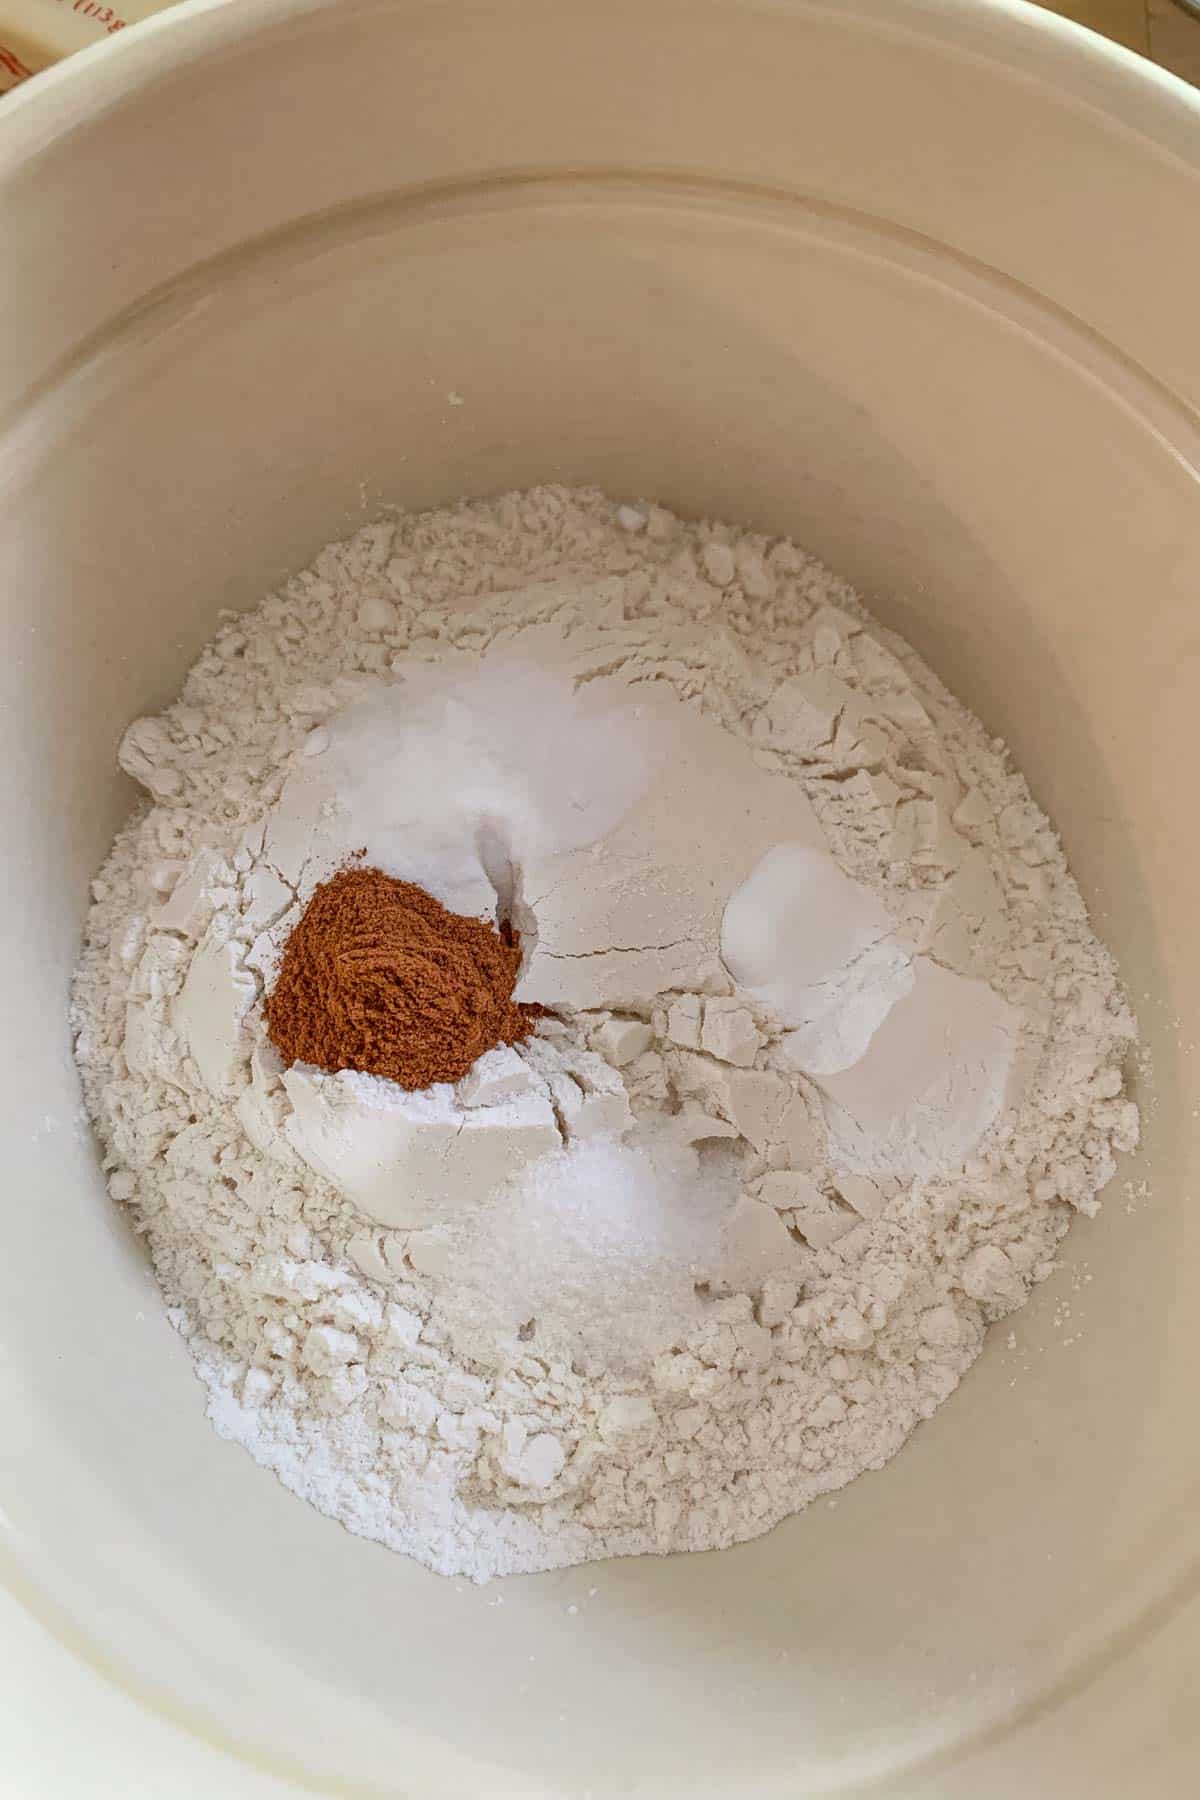 Dry ingredients for banana bread in a mixing bowl.